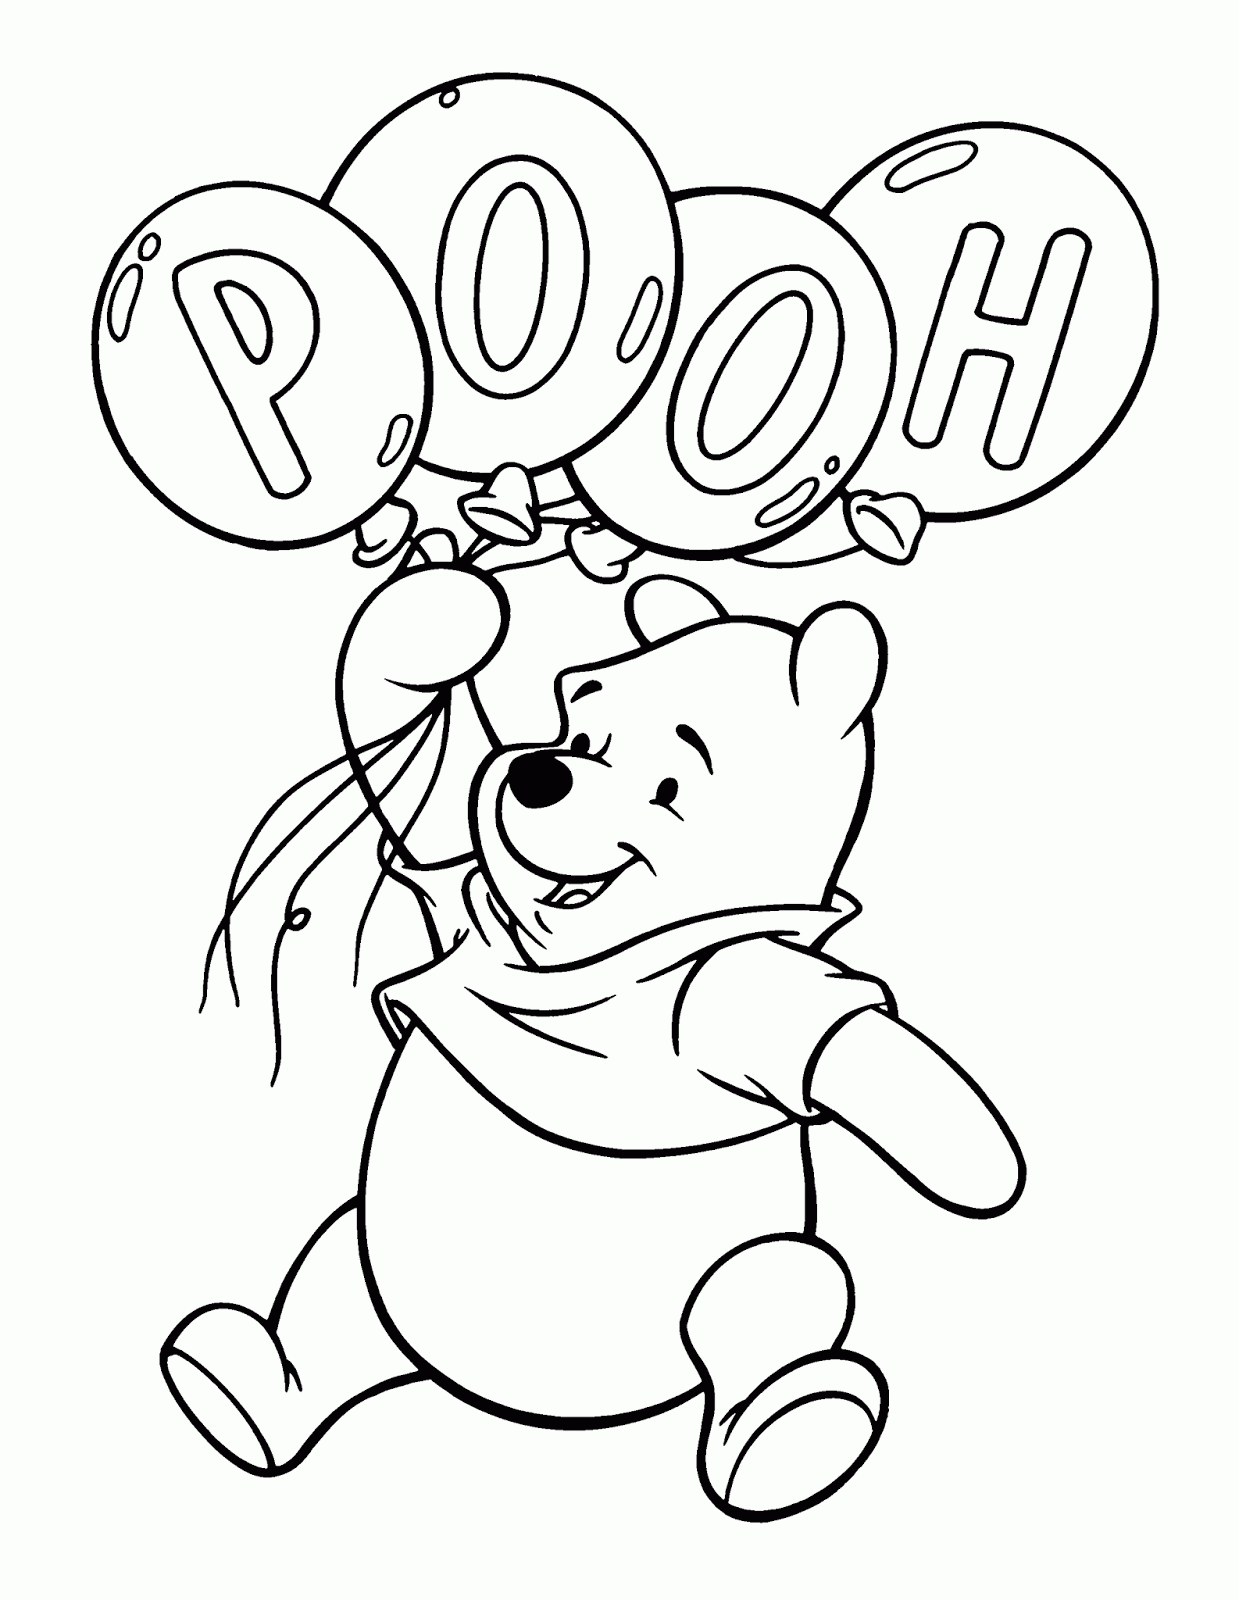 free winnie the pooh coloring pages coloring pages winnie the pooh kids online world blog coloring pooh free winnie pages the 